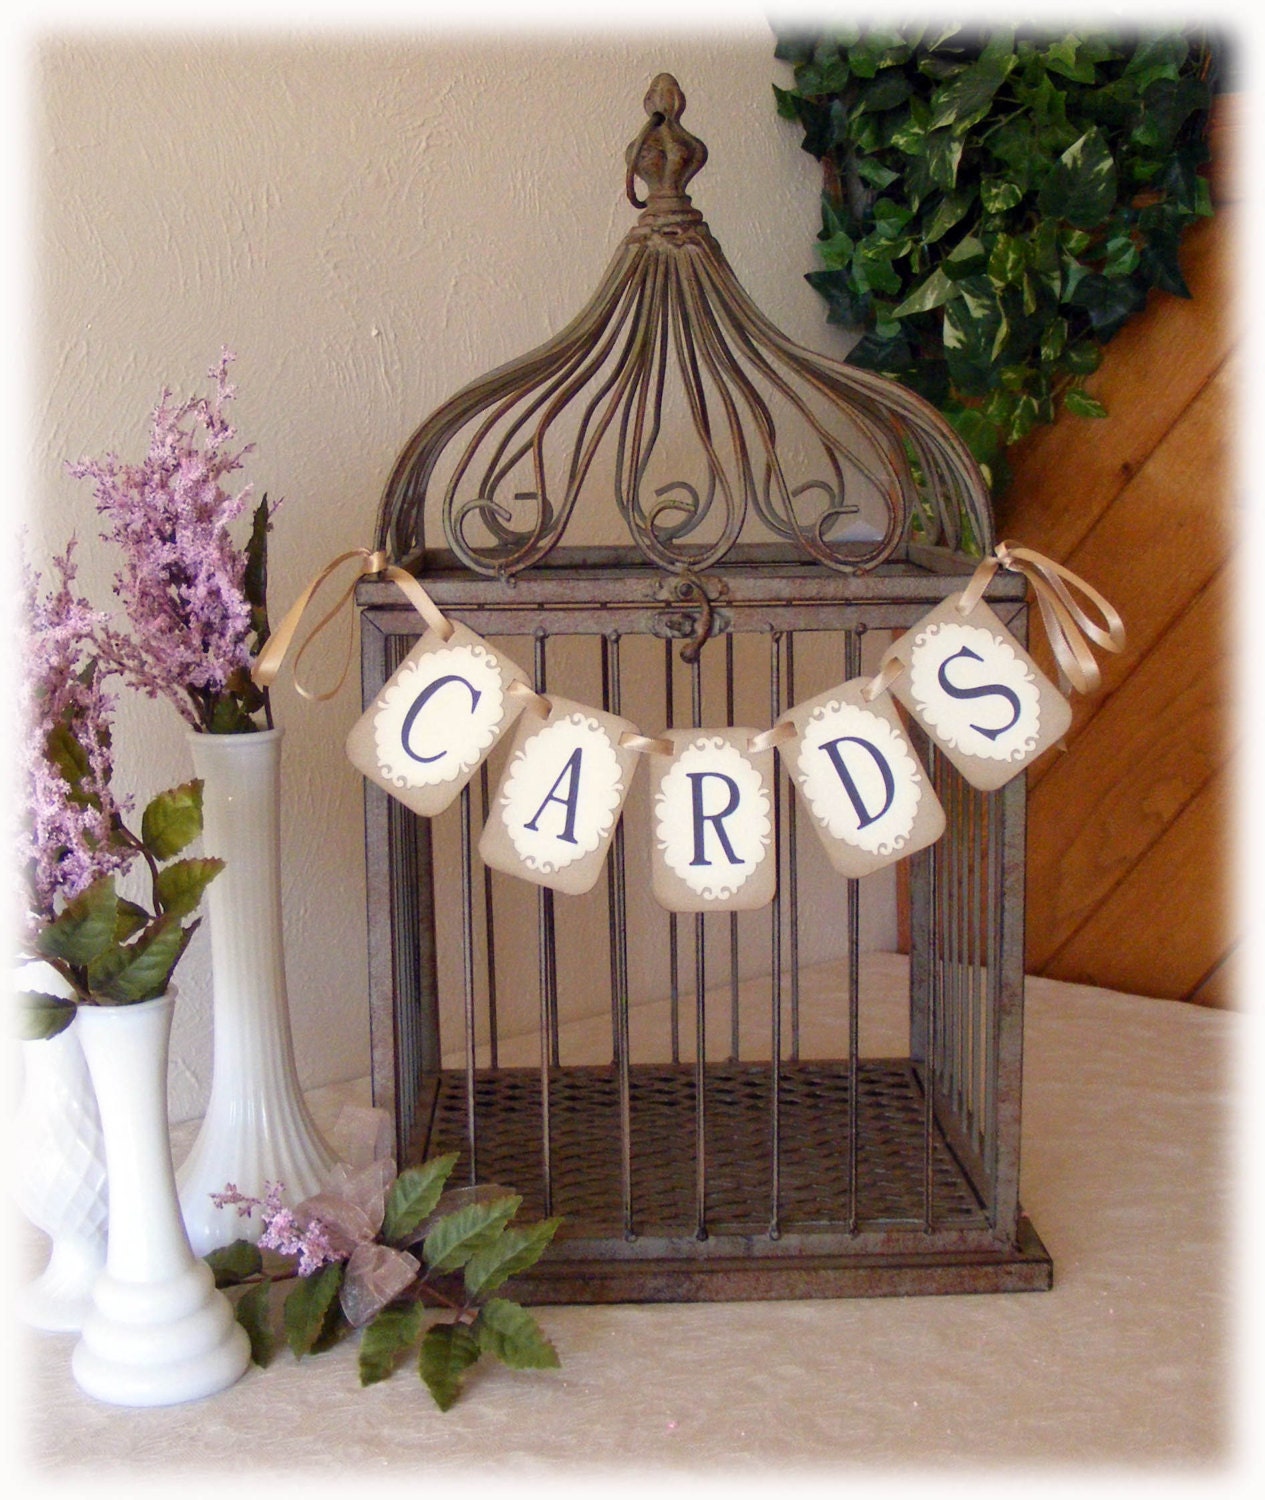 Victorian miniature CARDS banner for your wedding card box or birdcage - your choice of colors